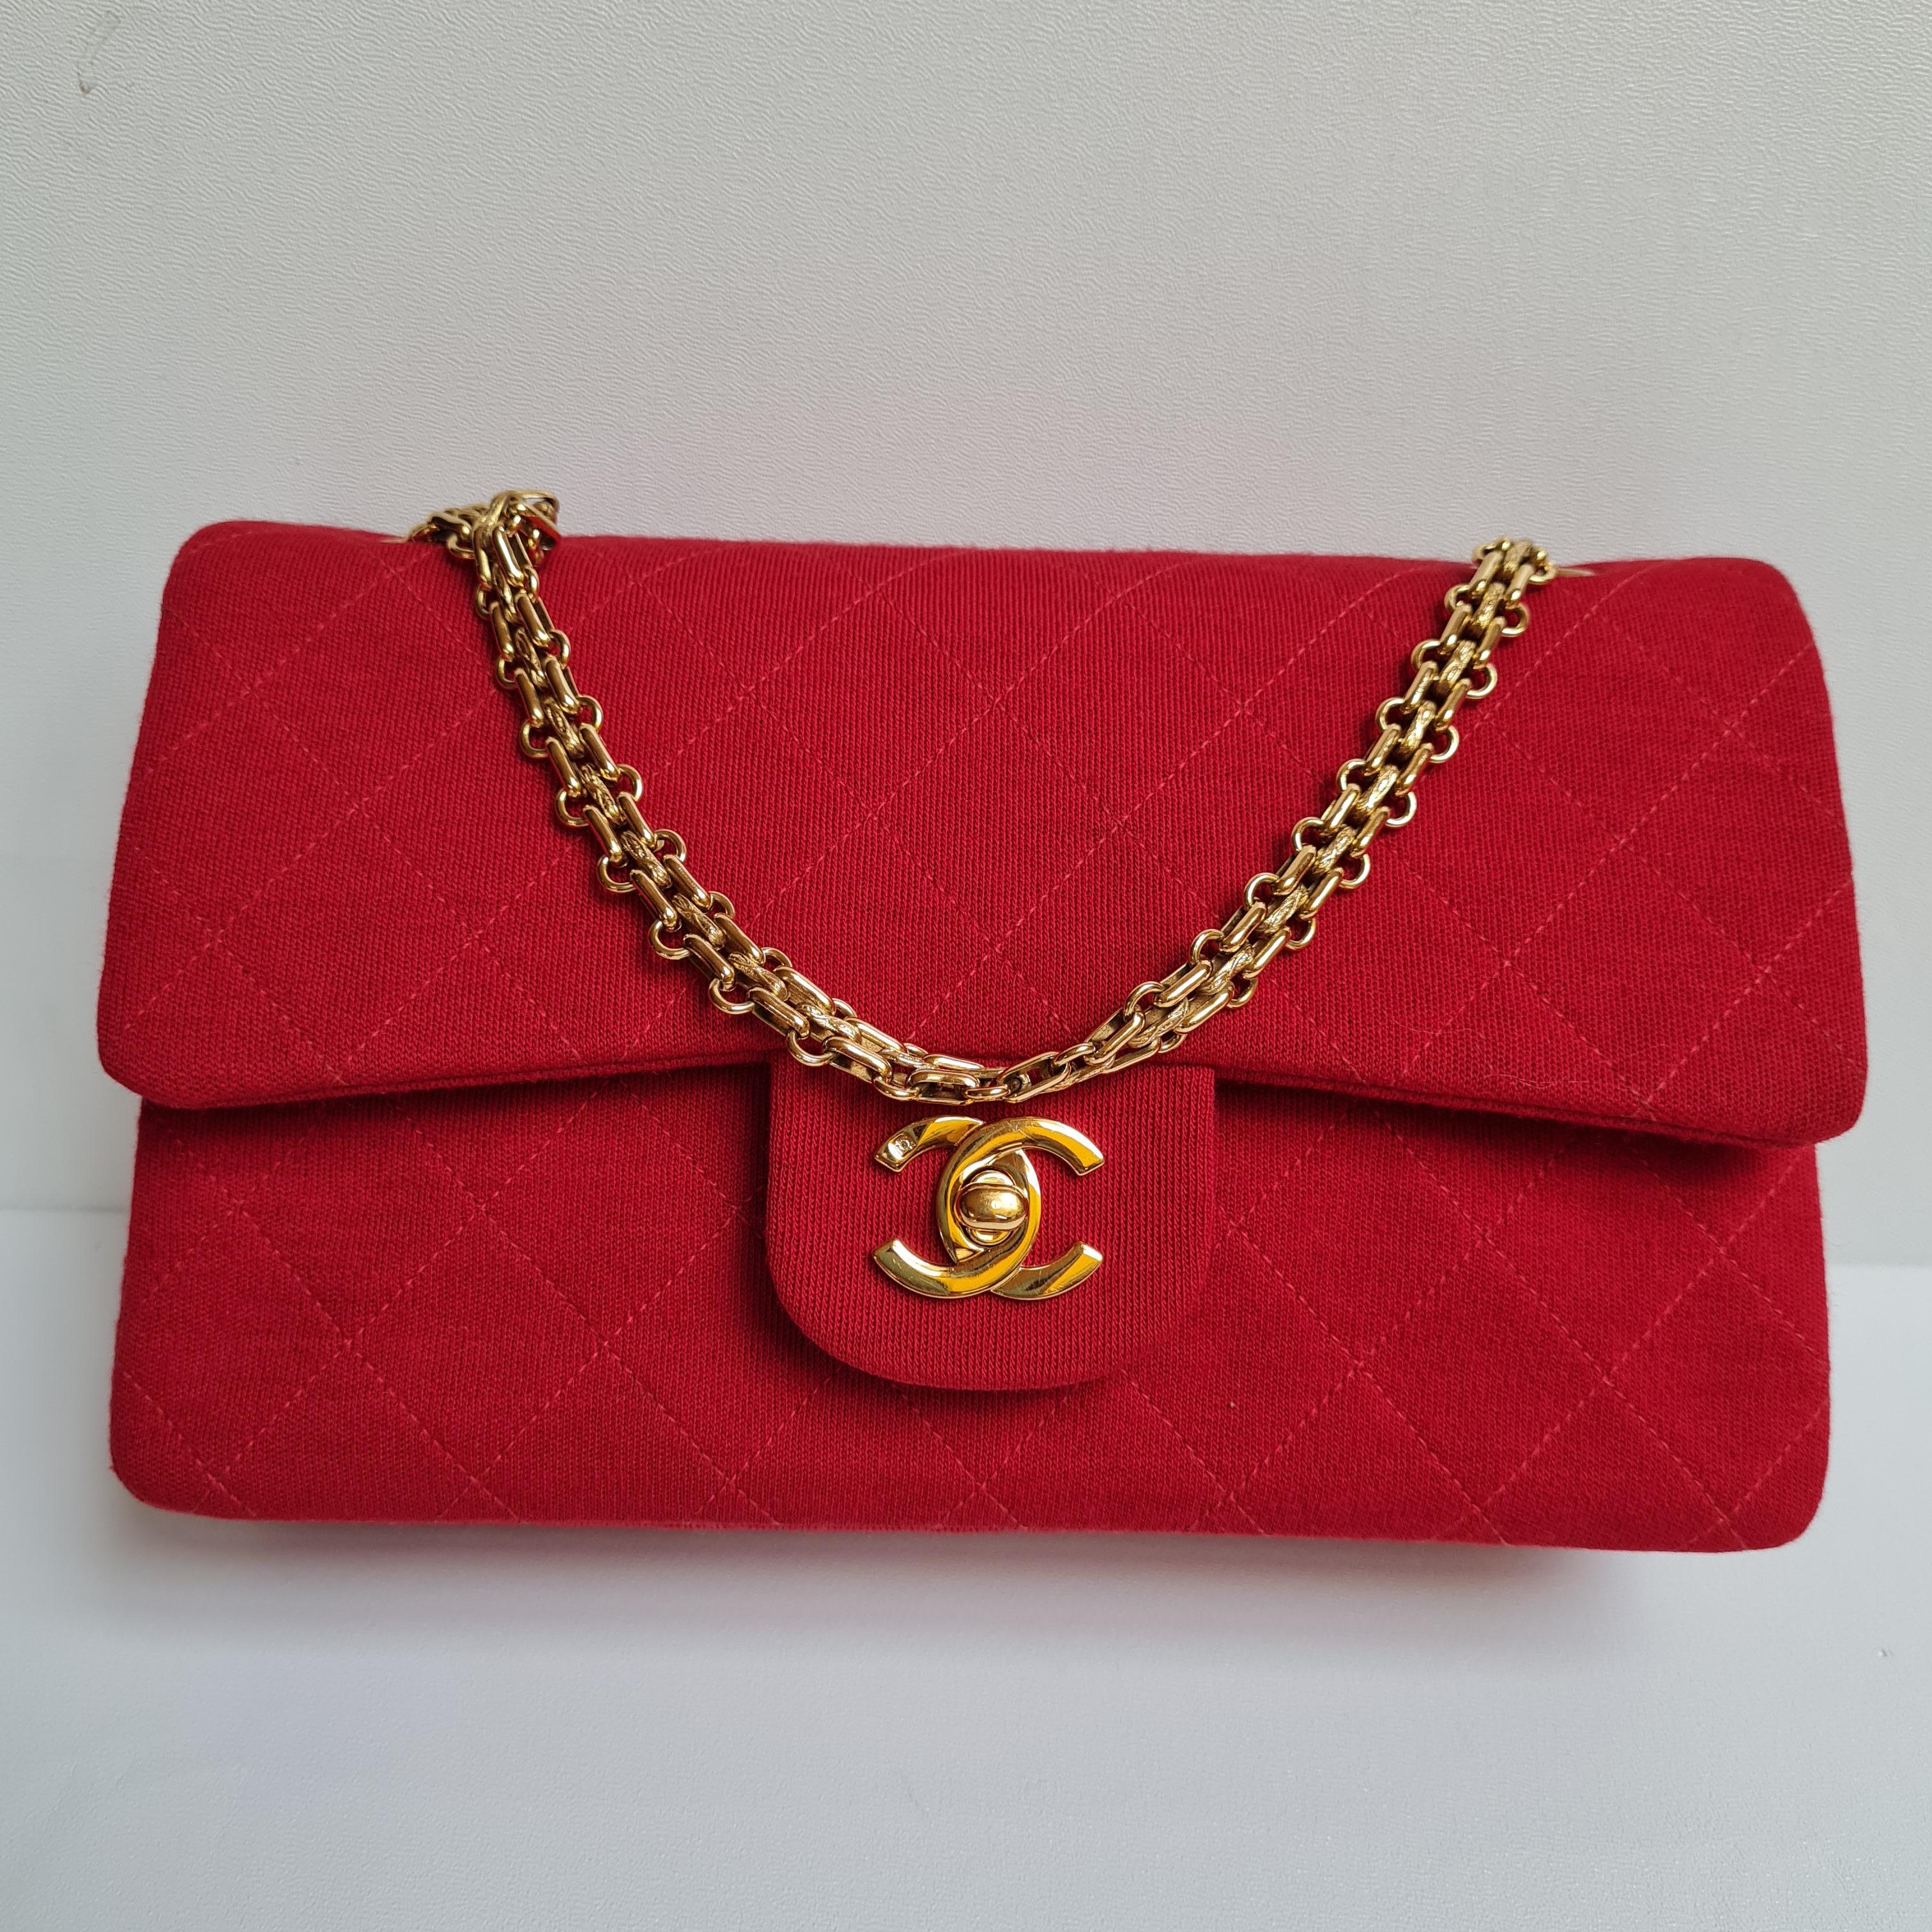 Rare Chanel Quilted Jersey Classic Medium Flapbag with GHW. Overall still in great condition. Series 4.


Inclusion: Authenticity Card, Dust Bag